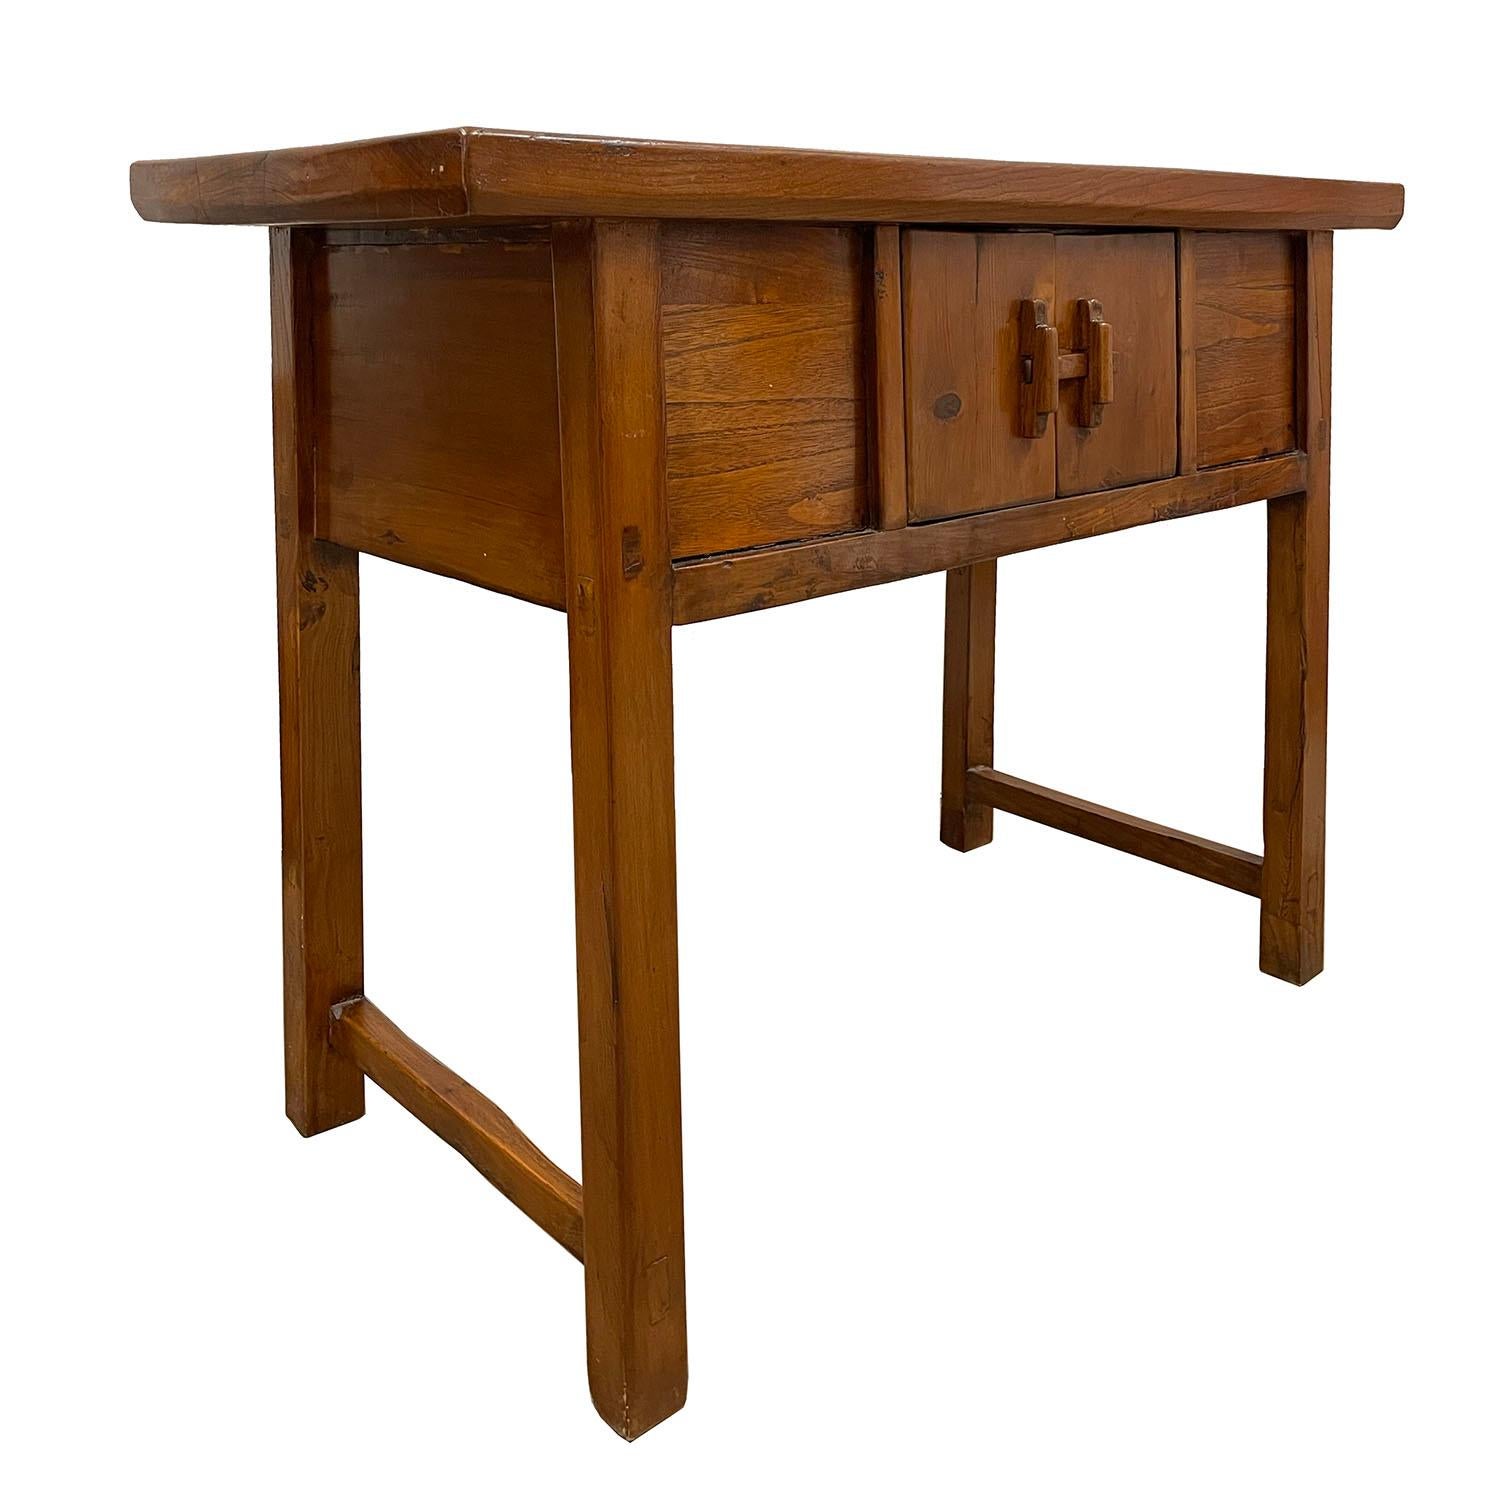 This beautiful vintage console table has beautiful traditional Ming style simple country design. It features double open doors compartment on the front. Both sides and back are finished. This table was made at about 1950's using solid elm wood. The